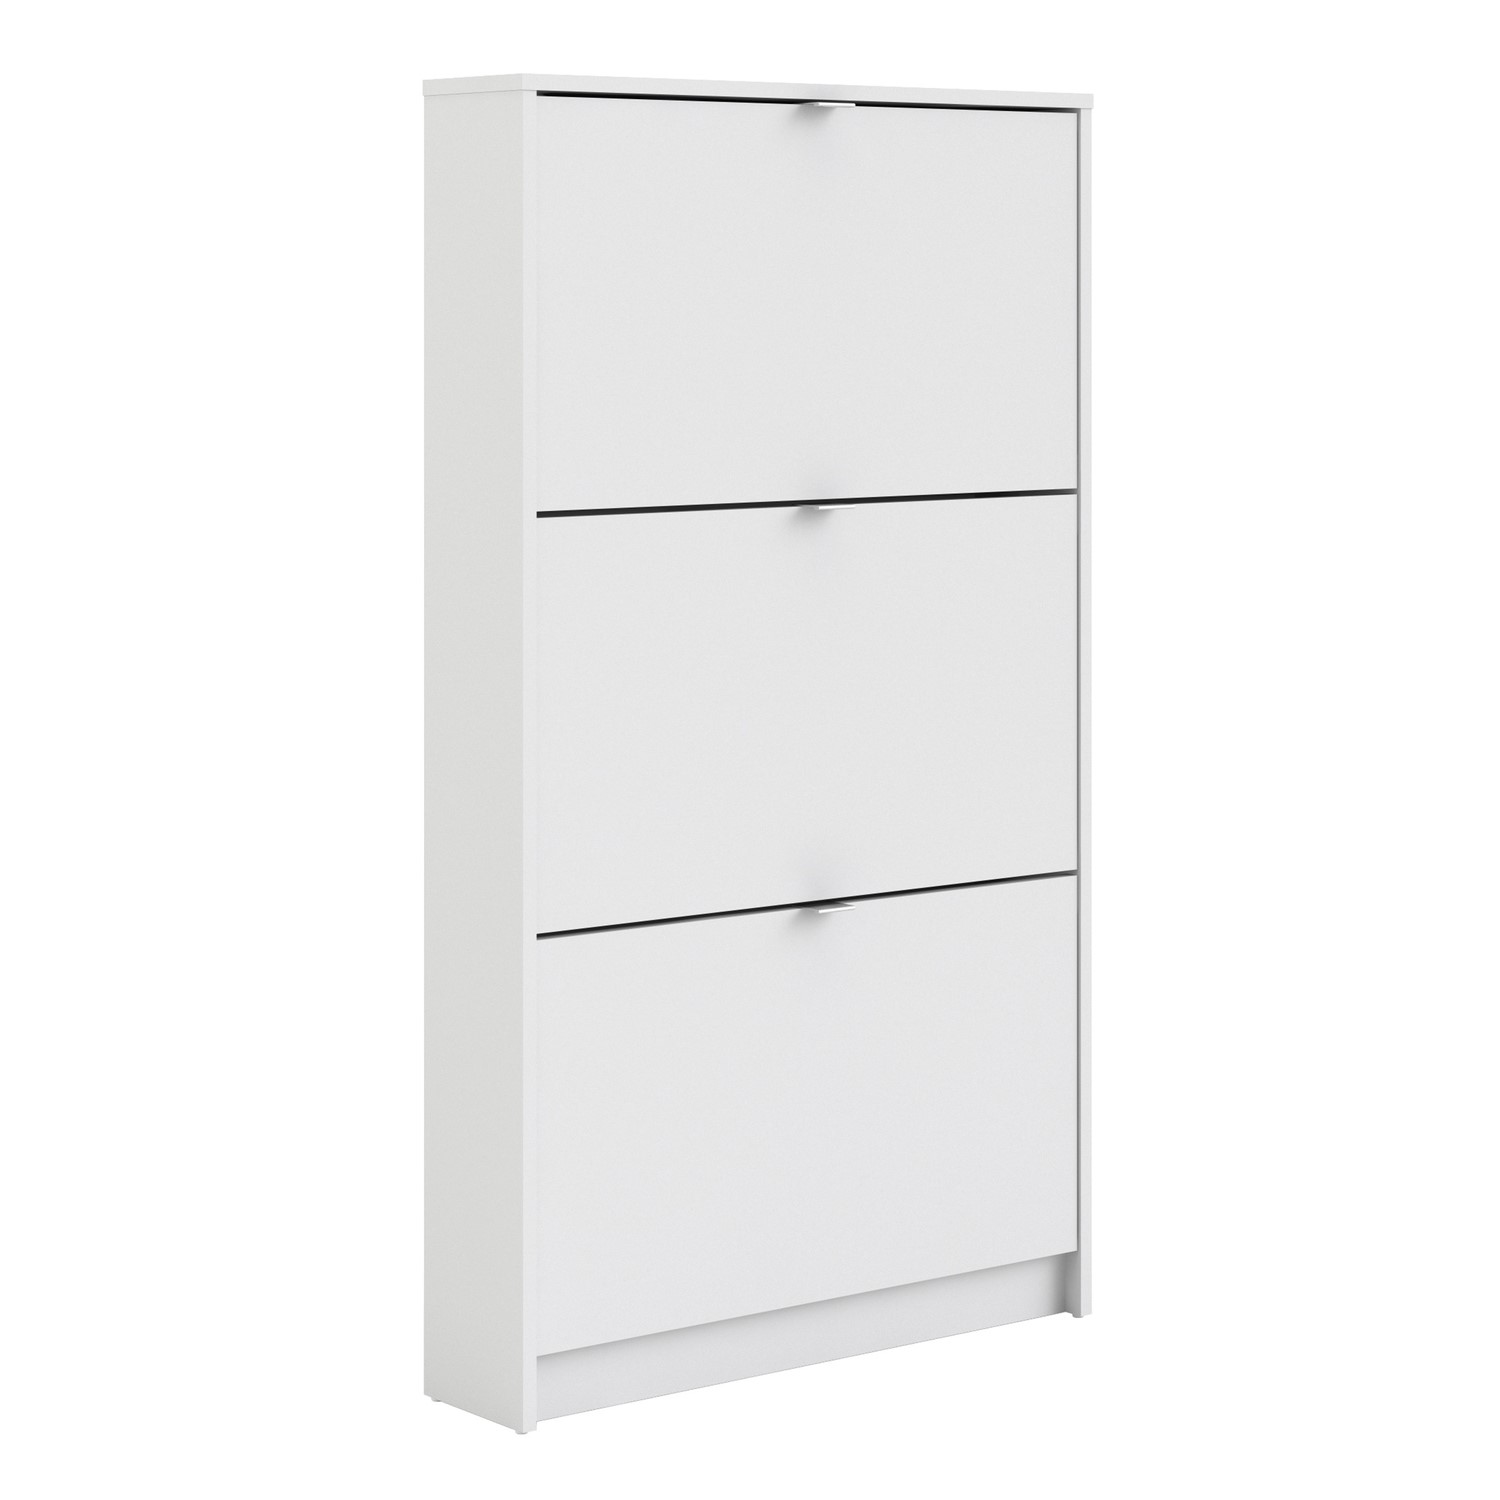 Photo of Slim white shoe cabinet with 3 drawers - 9 pairs